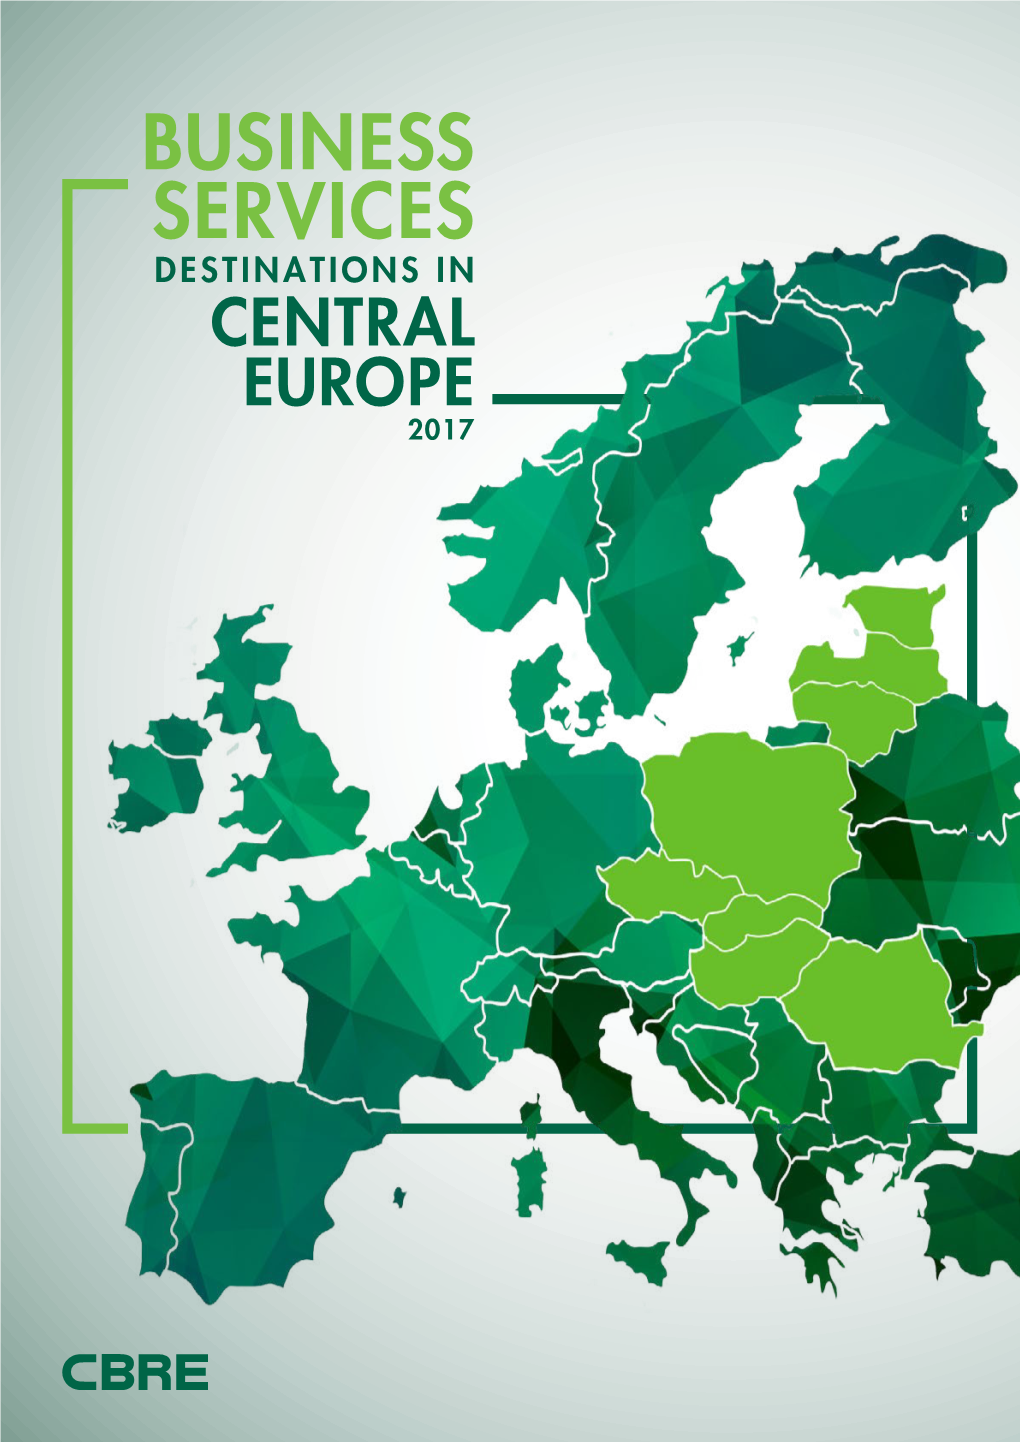 Business Services Destinations in Central Europe 2017